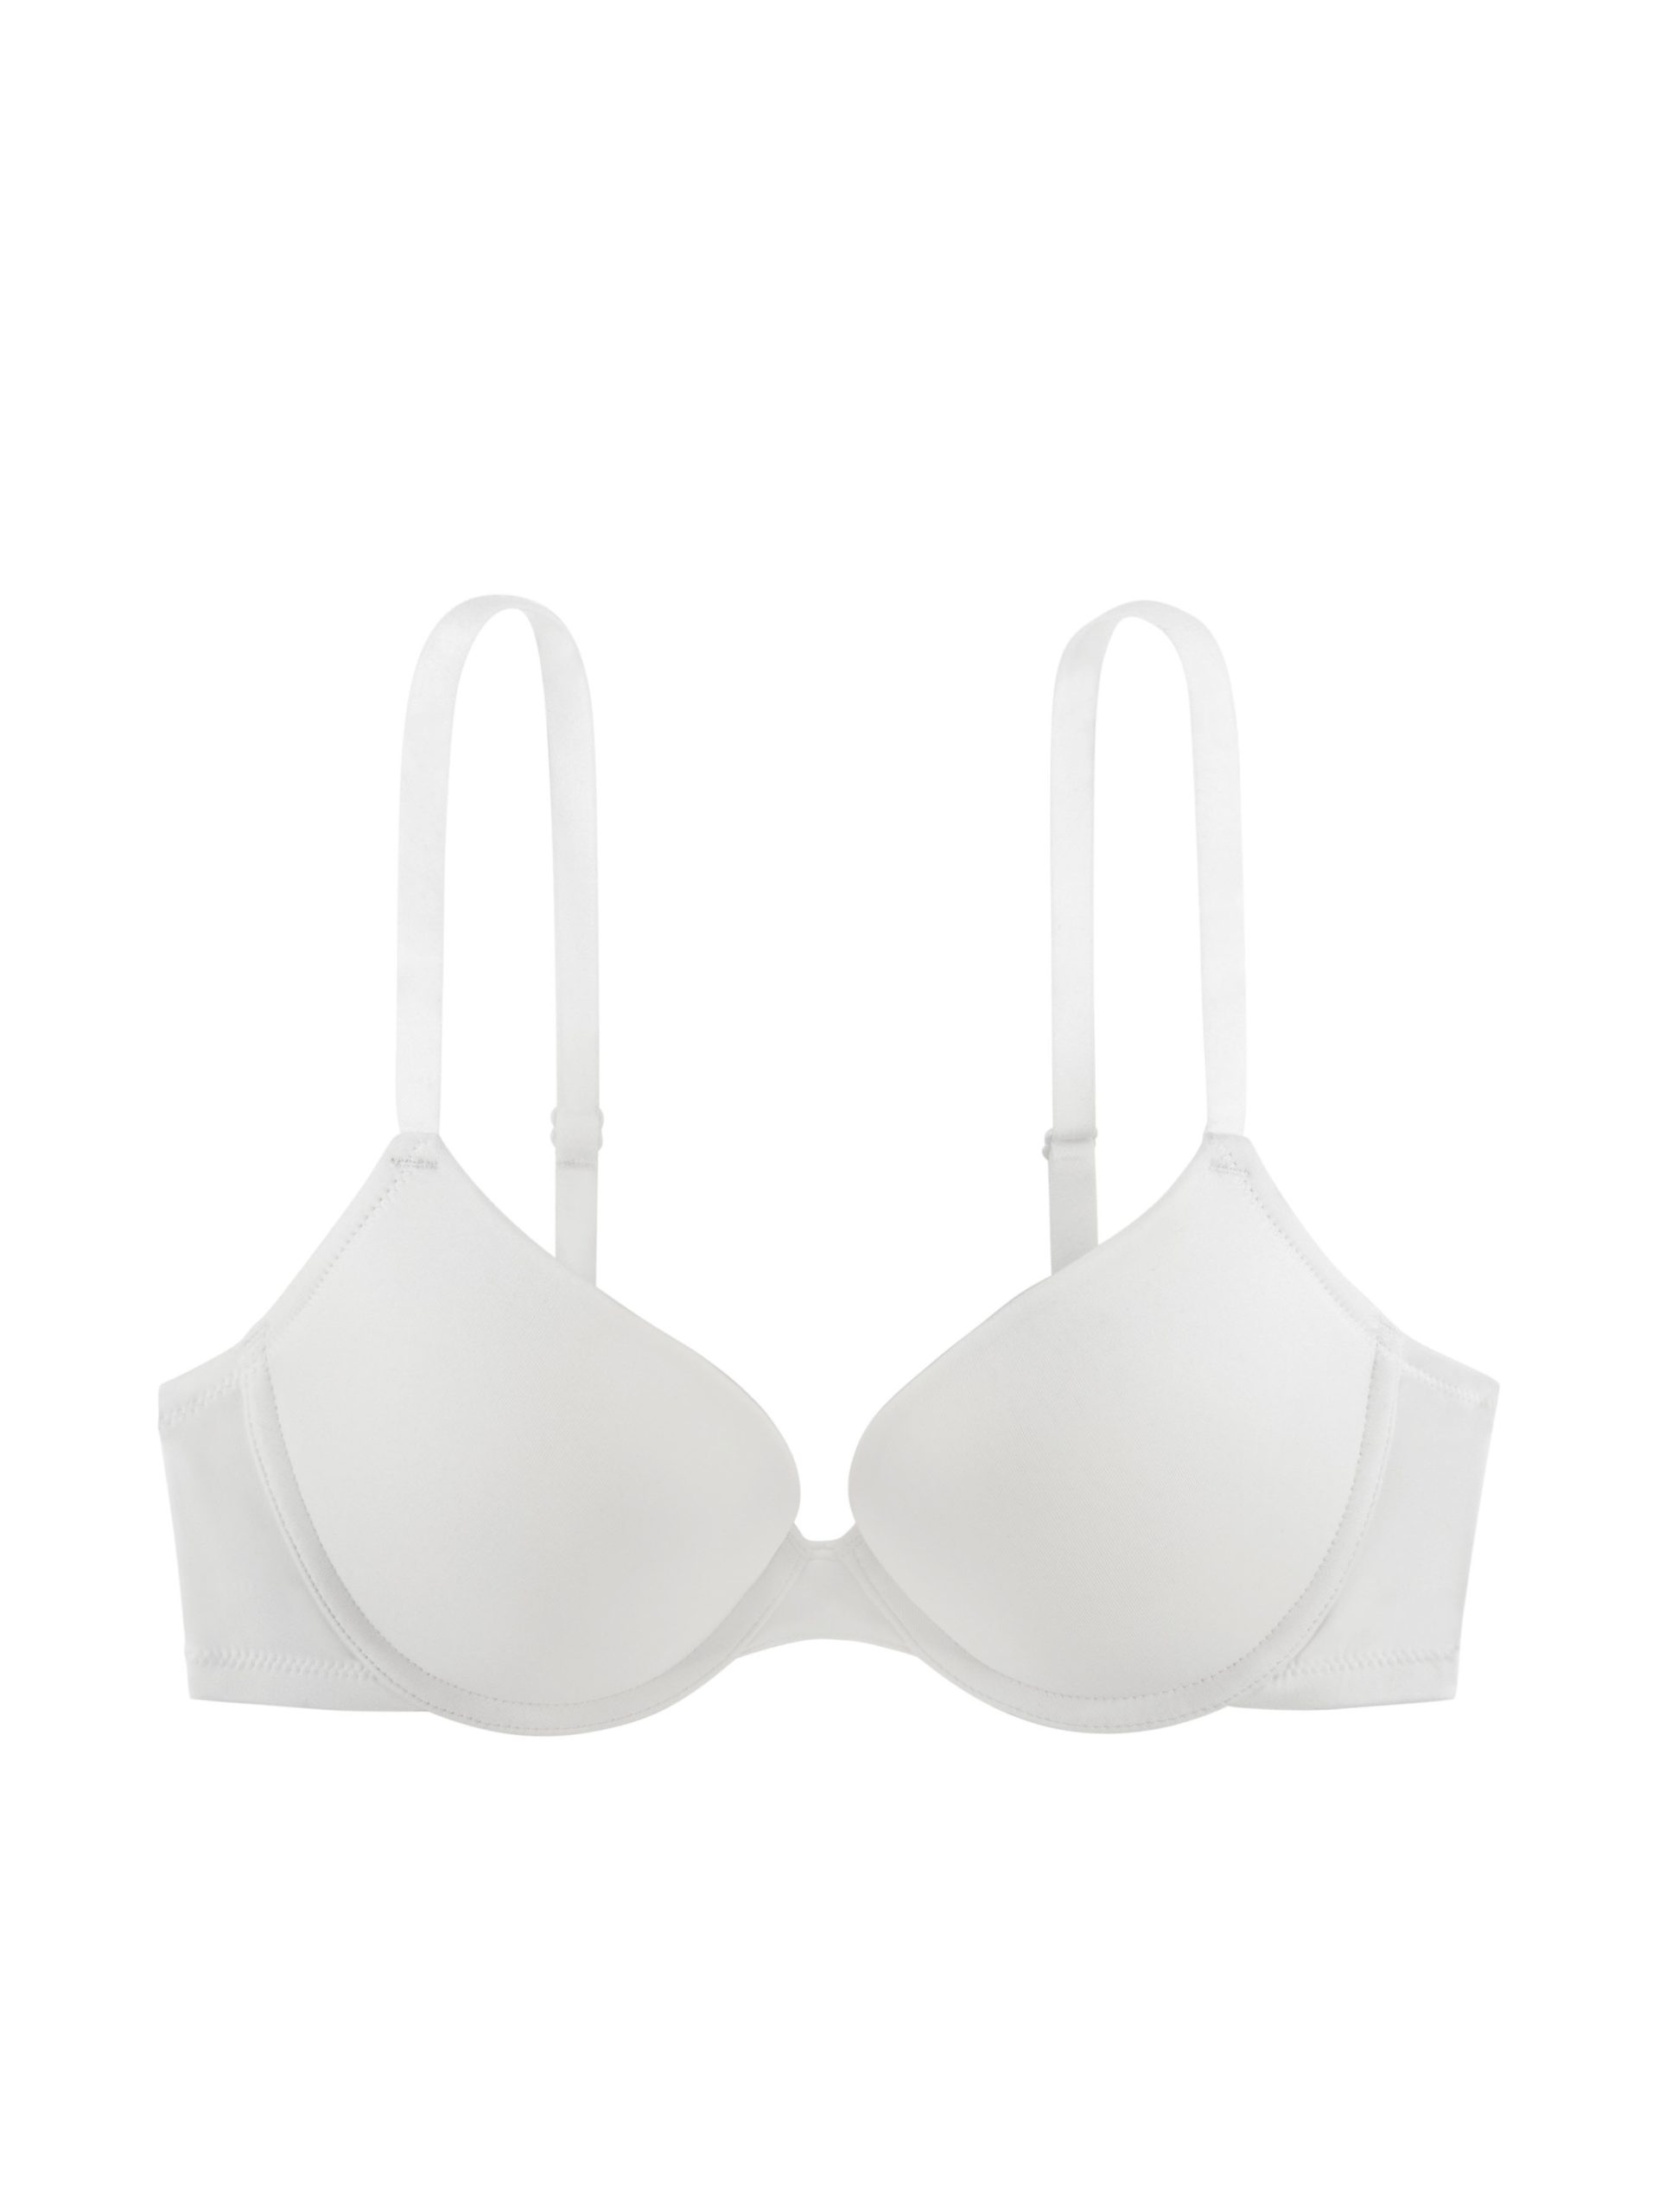 Our Products: Super Push Up Bra, Cup B, DORINA